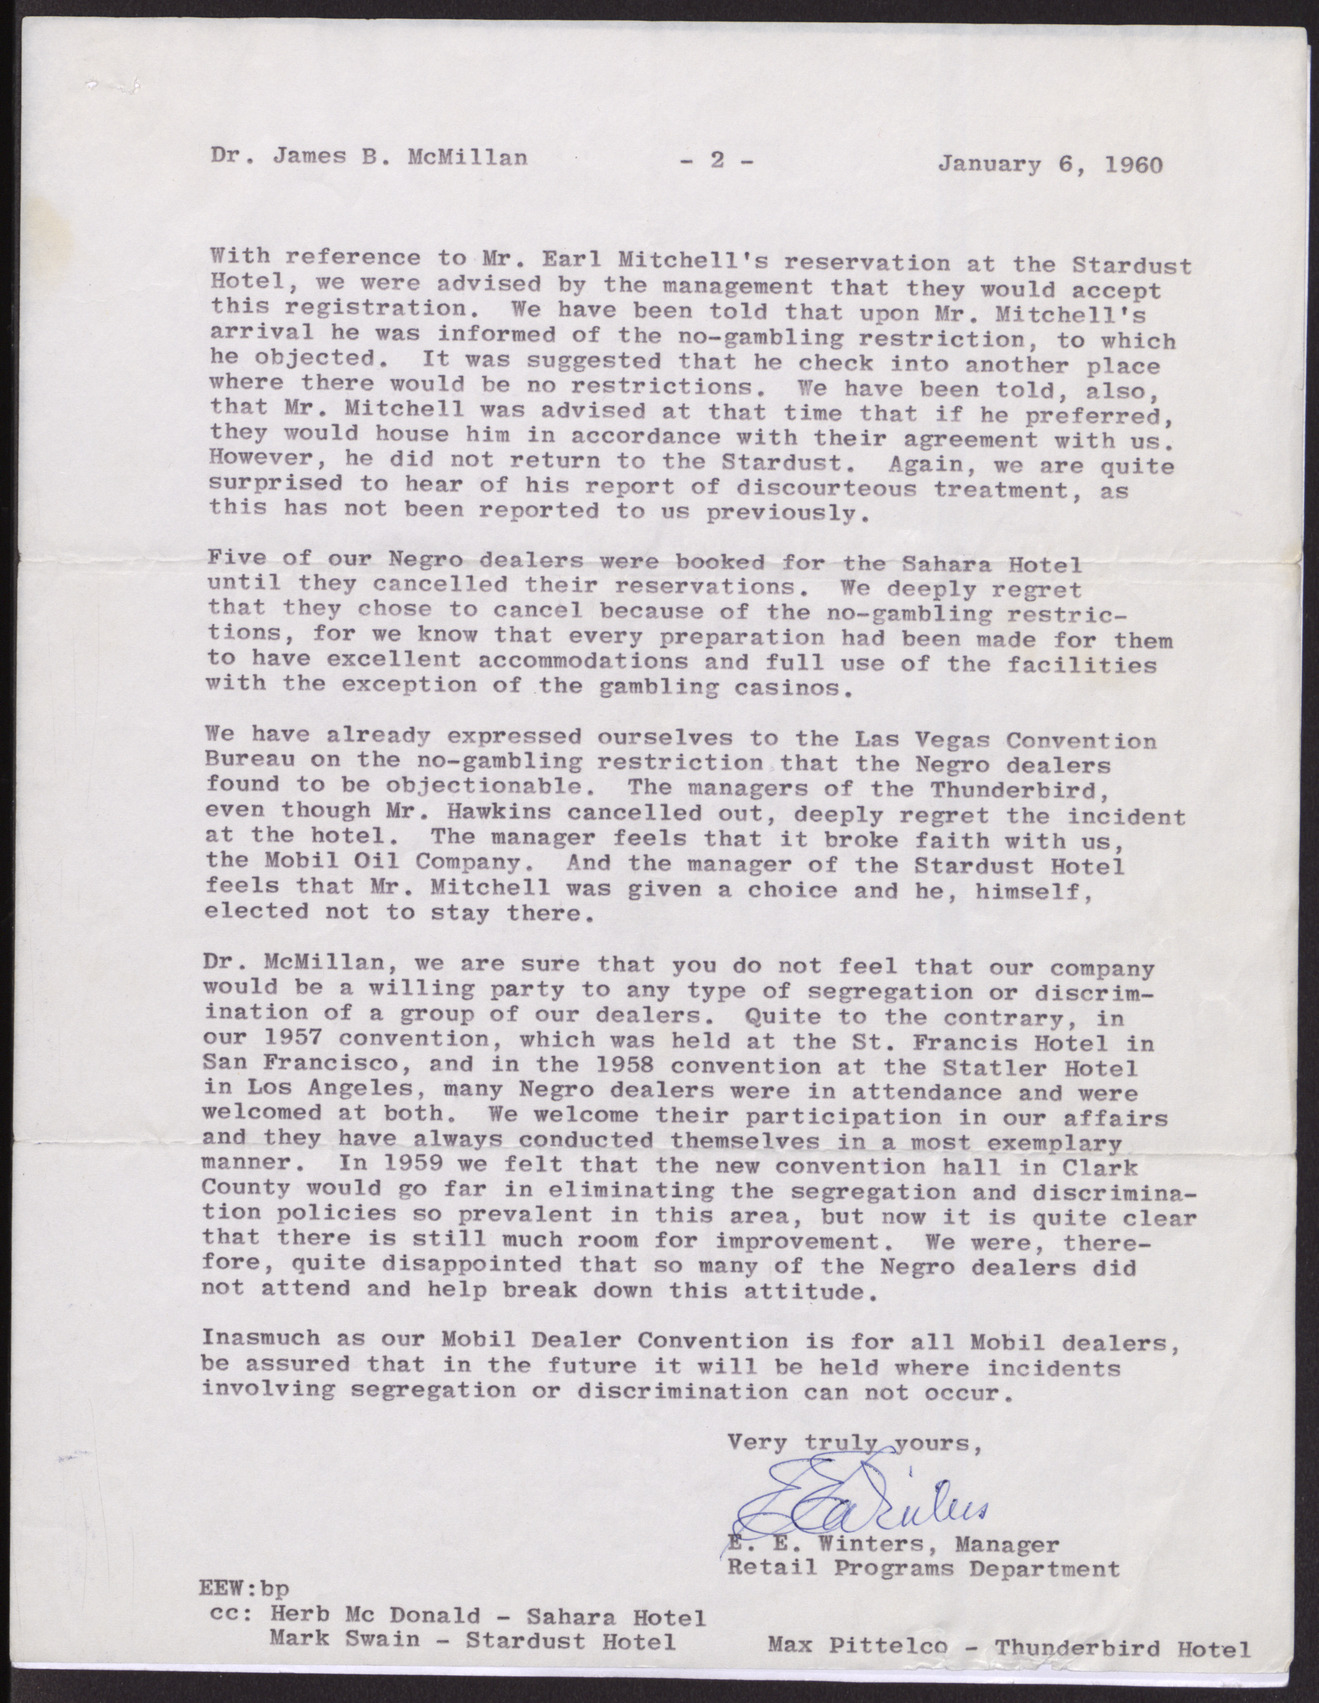 Letter to James B. McMillan from E. E. Winters, January 6, 1960, page 2